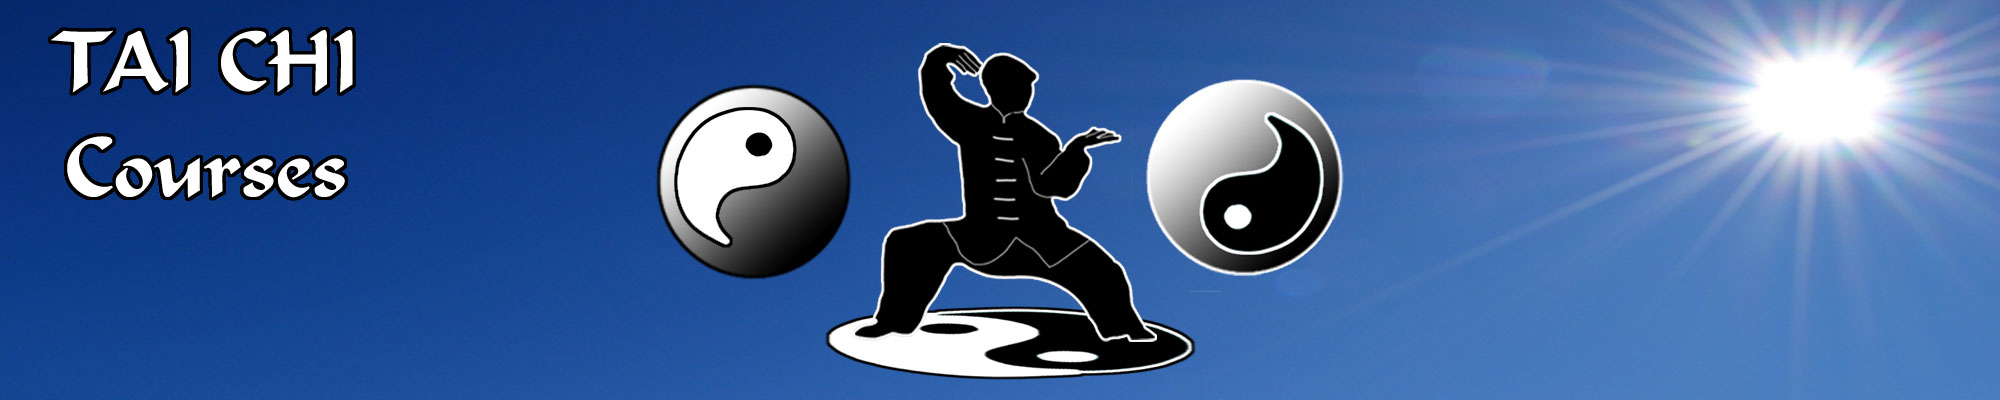 Tai Chi Courses for Health Wellness and Energy